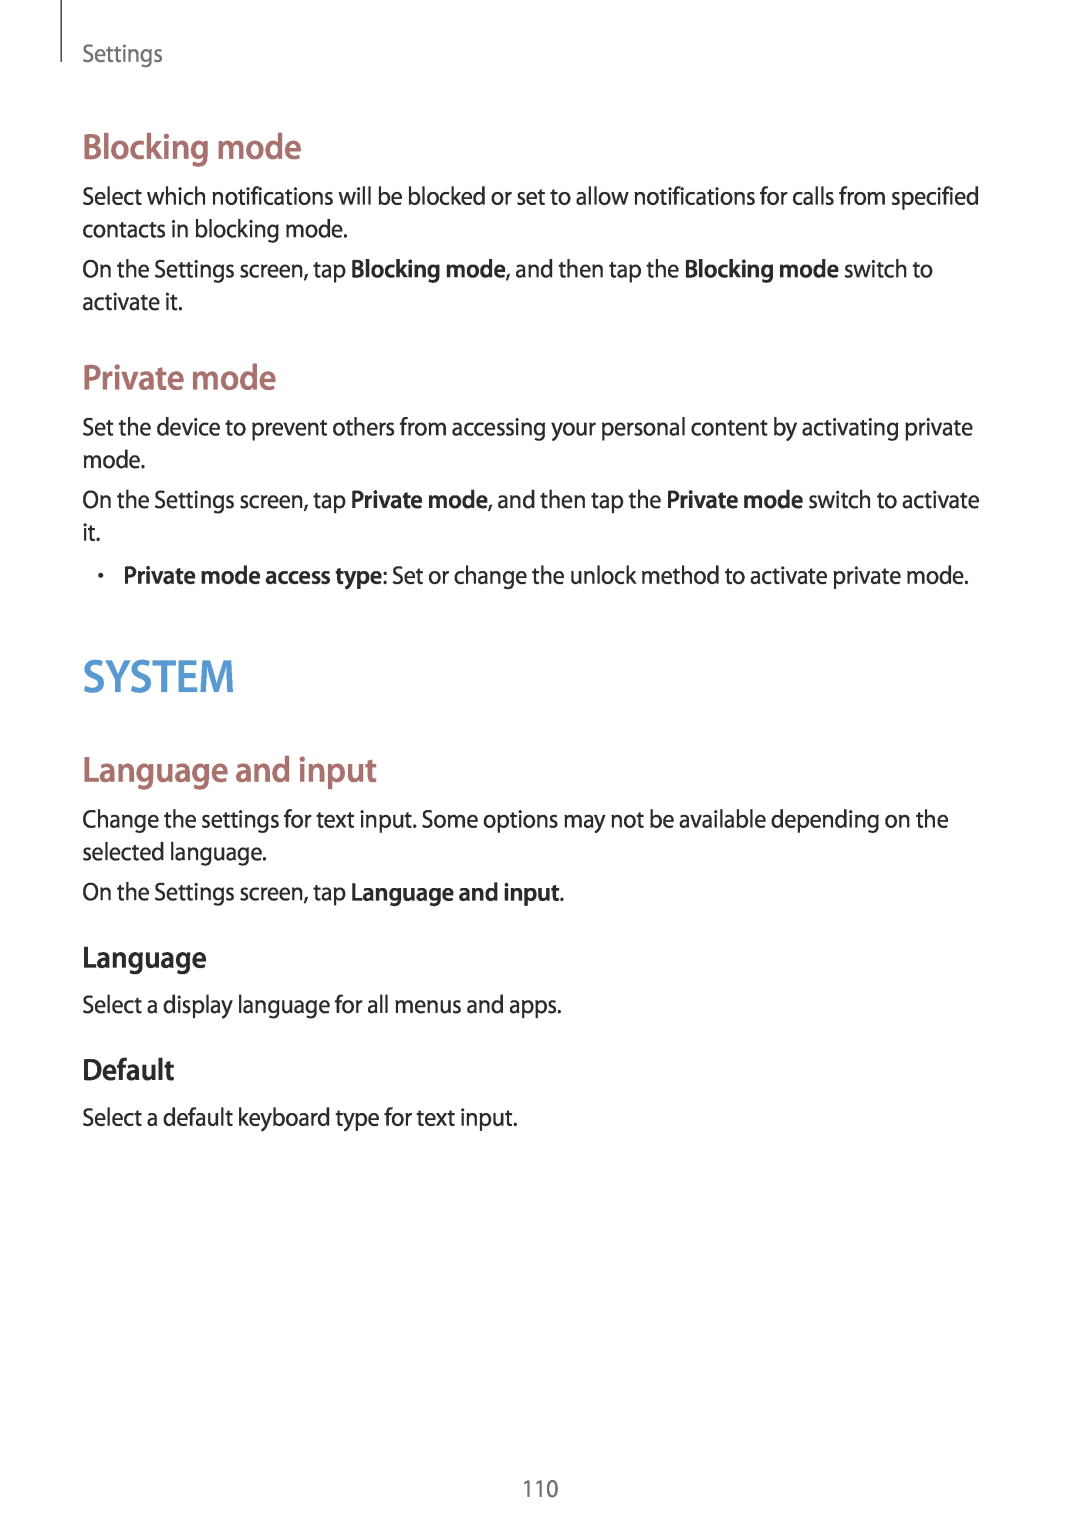 Samsung SM-A300FZSUBGL, SM-A300FZDDSEE manual System, Blocking mode, Private mode, Language and input, Default, Settings 